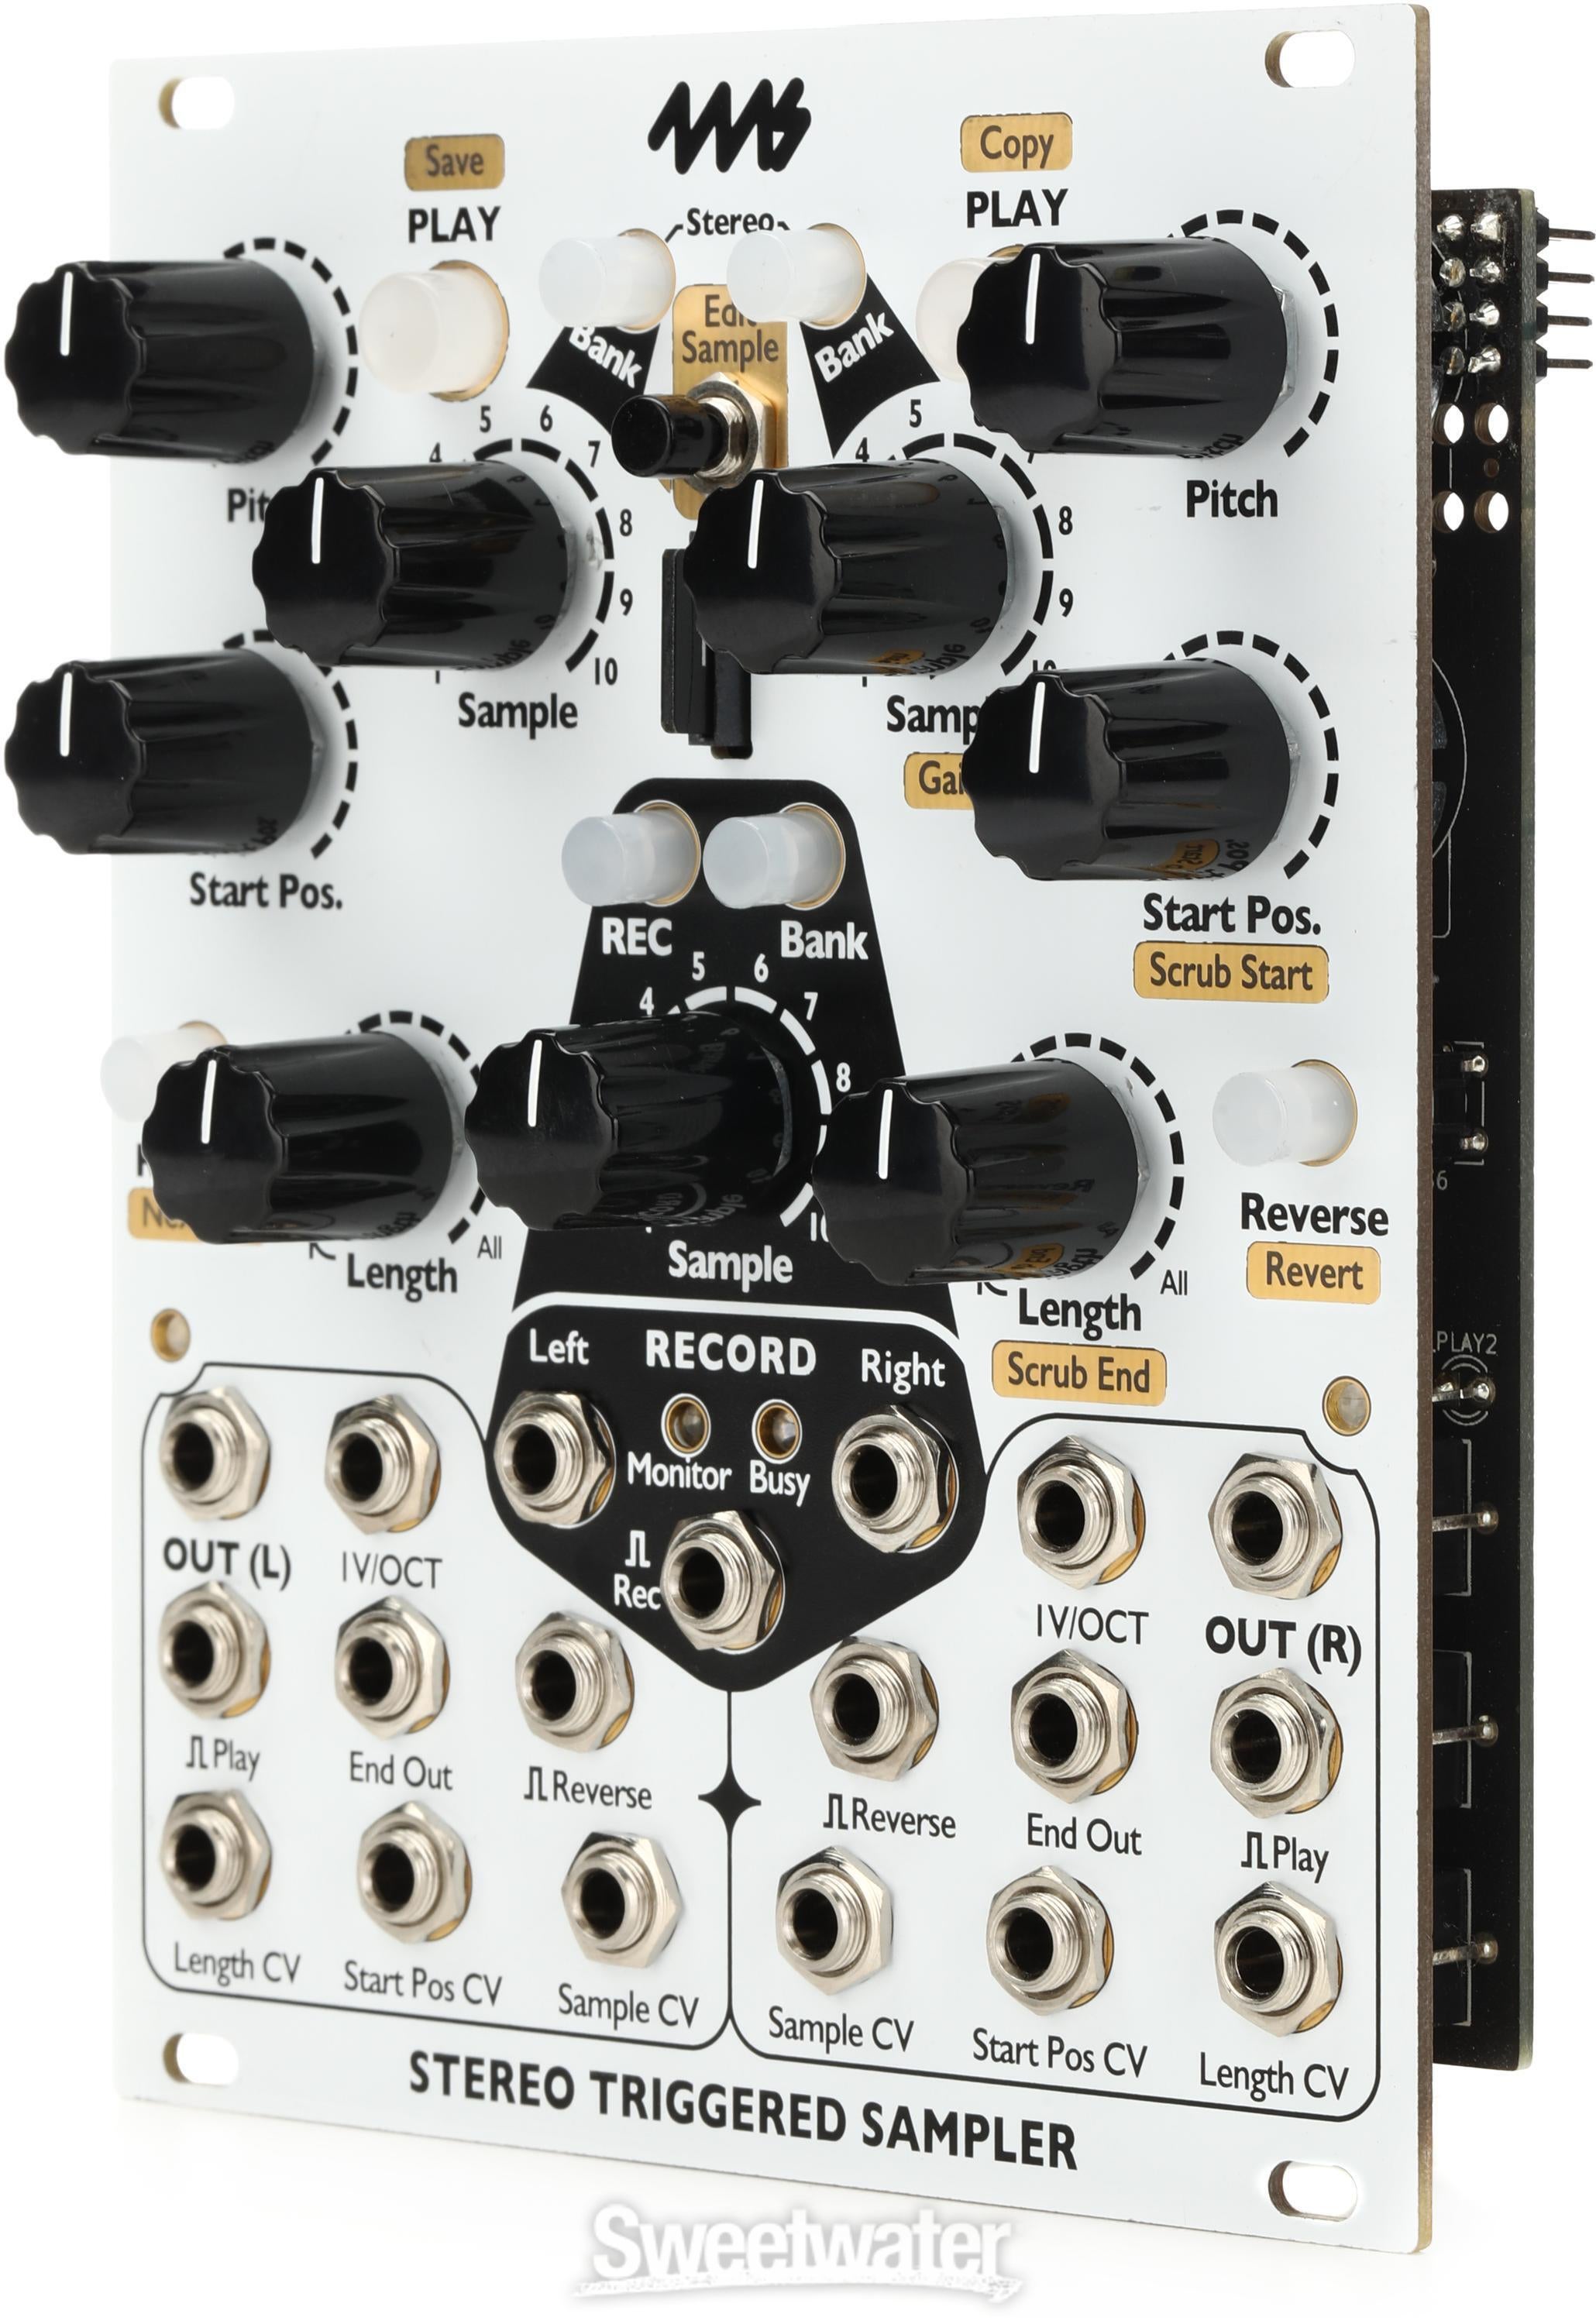 4ms Stereo Triggered Sampler Eurorack Module | Sweetwater